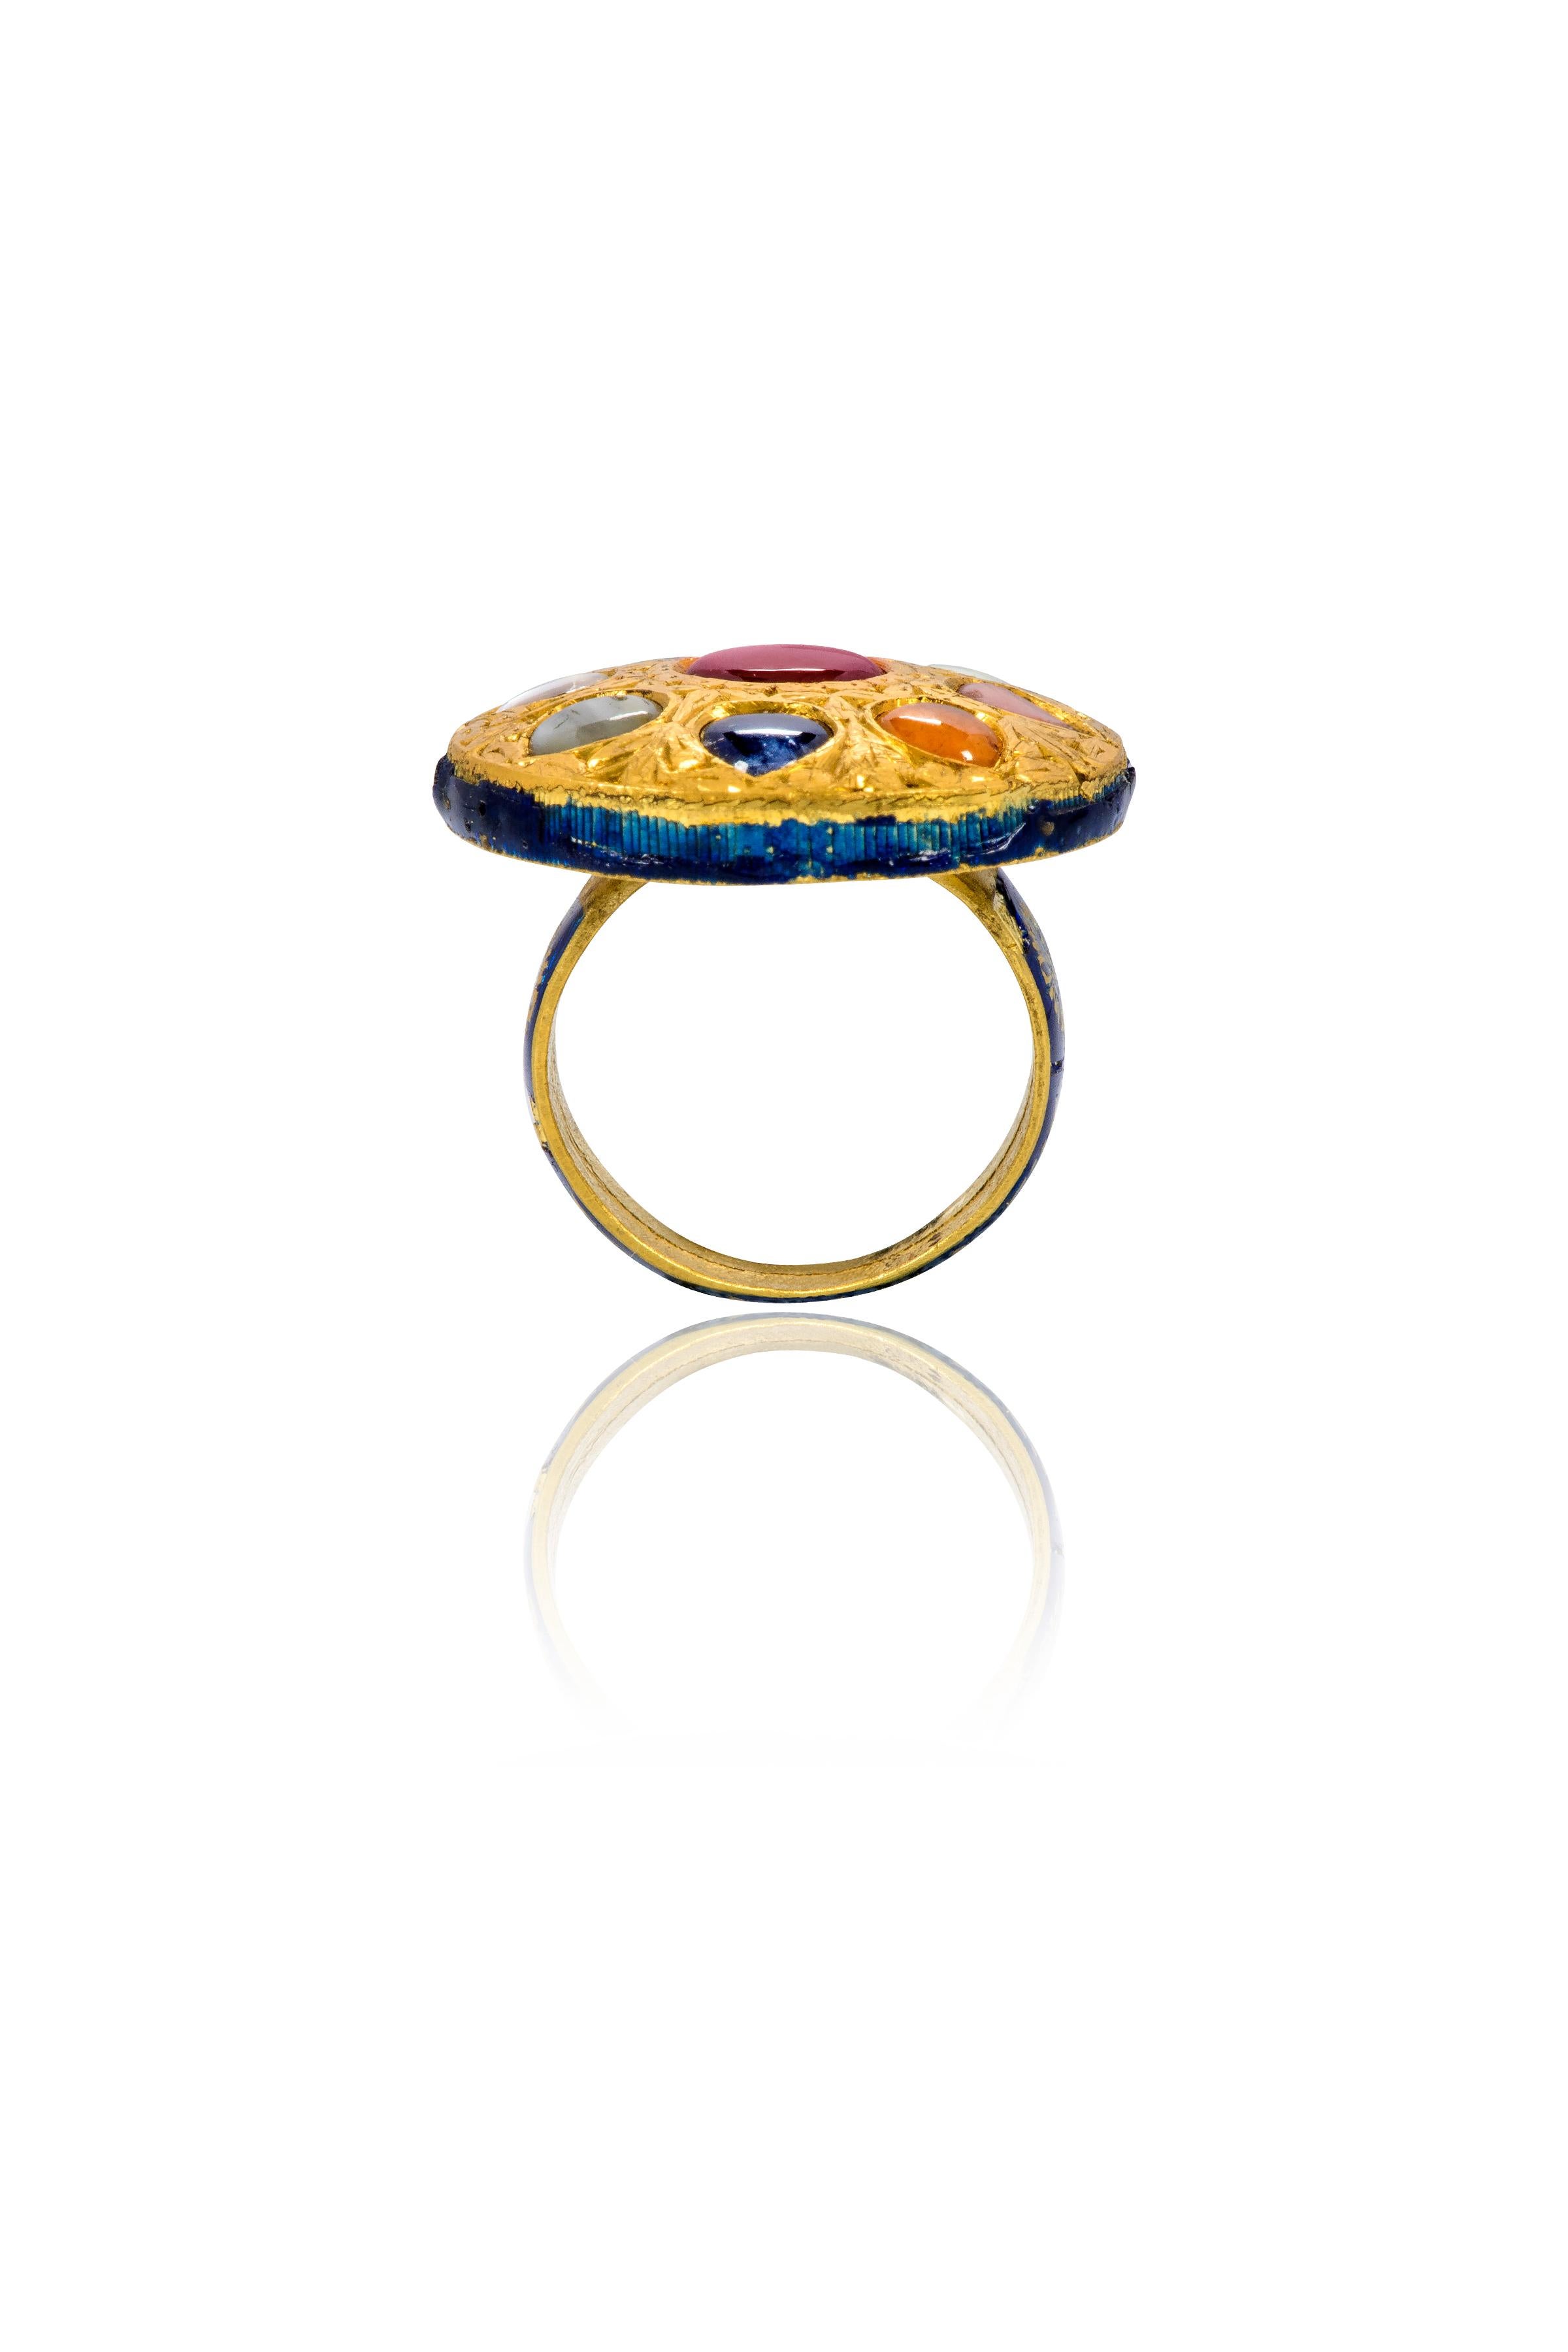 Anglo-Indian 22 Karat Gold Nine Precious Gems Cocktail Ring with Blue Enamel Work For Sale